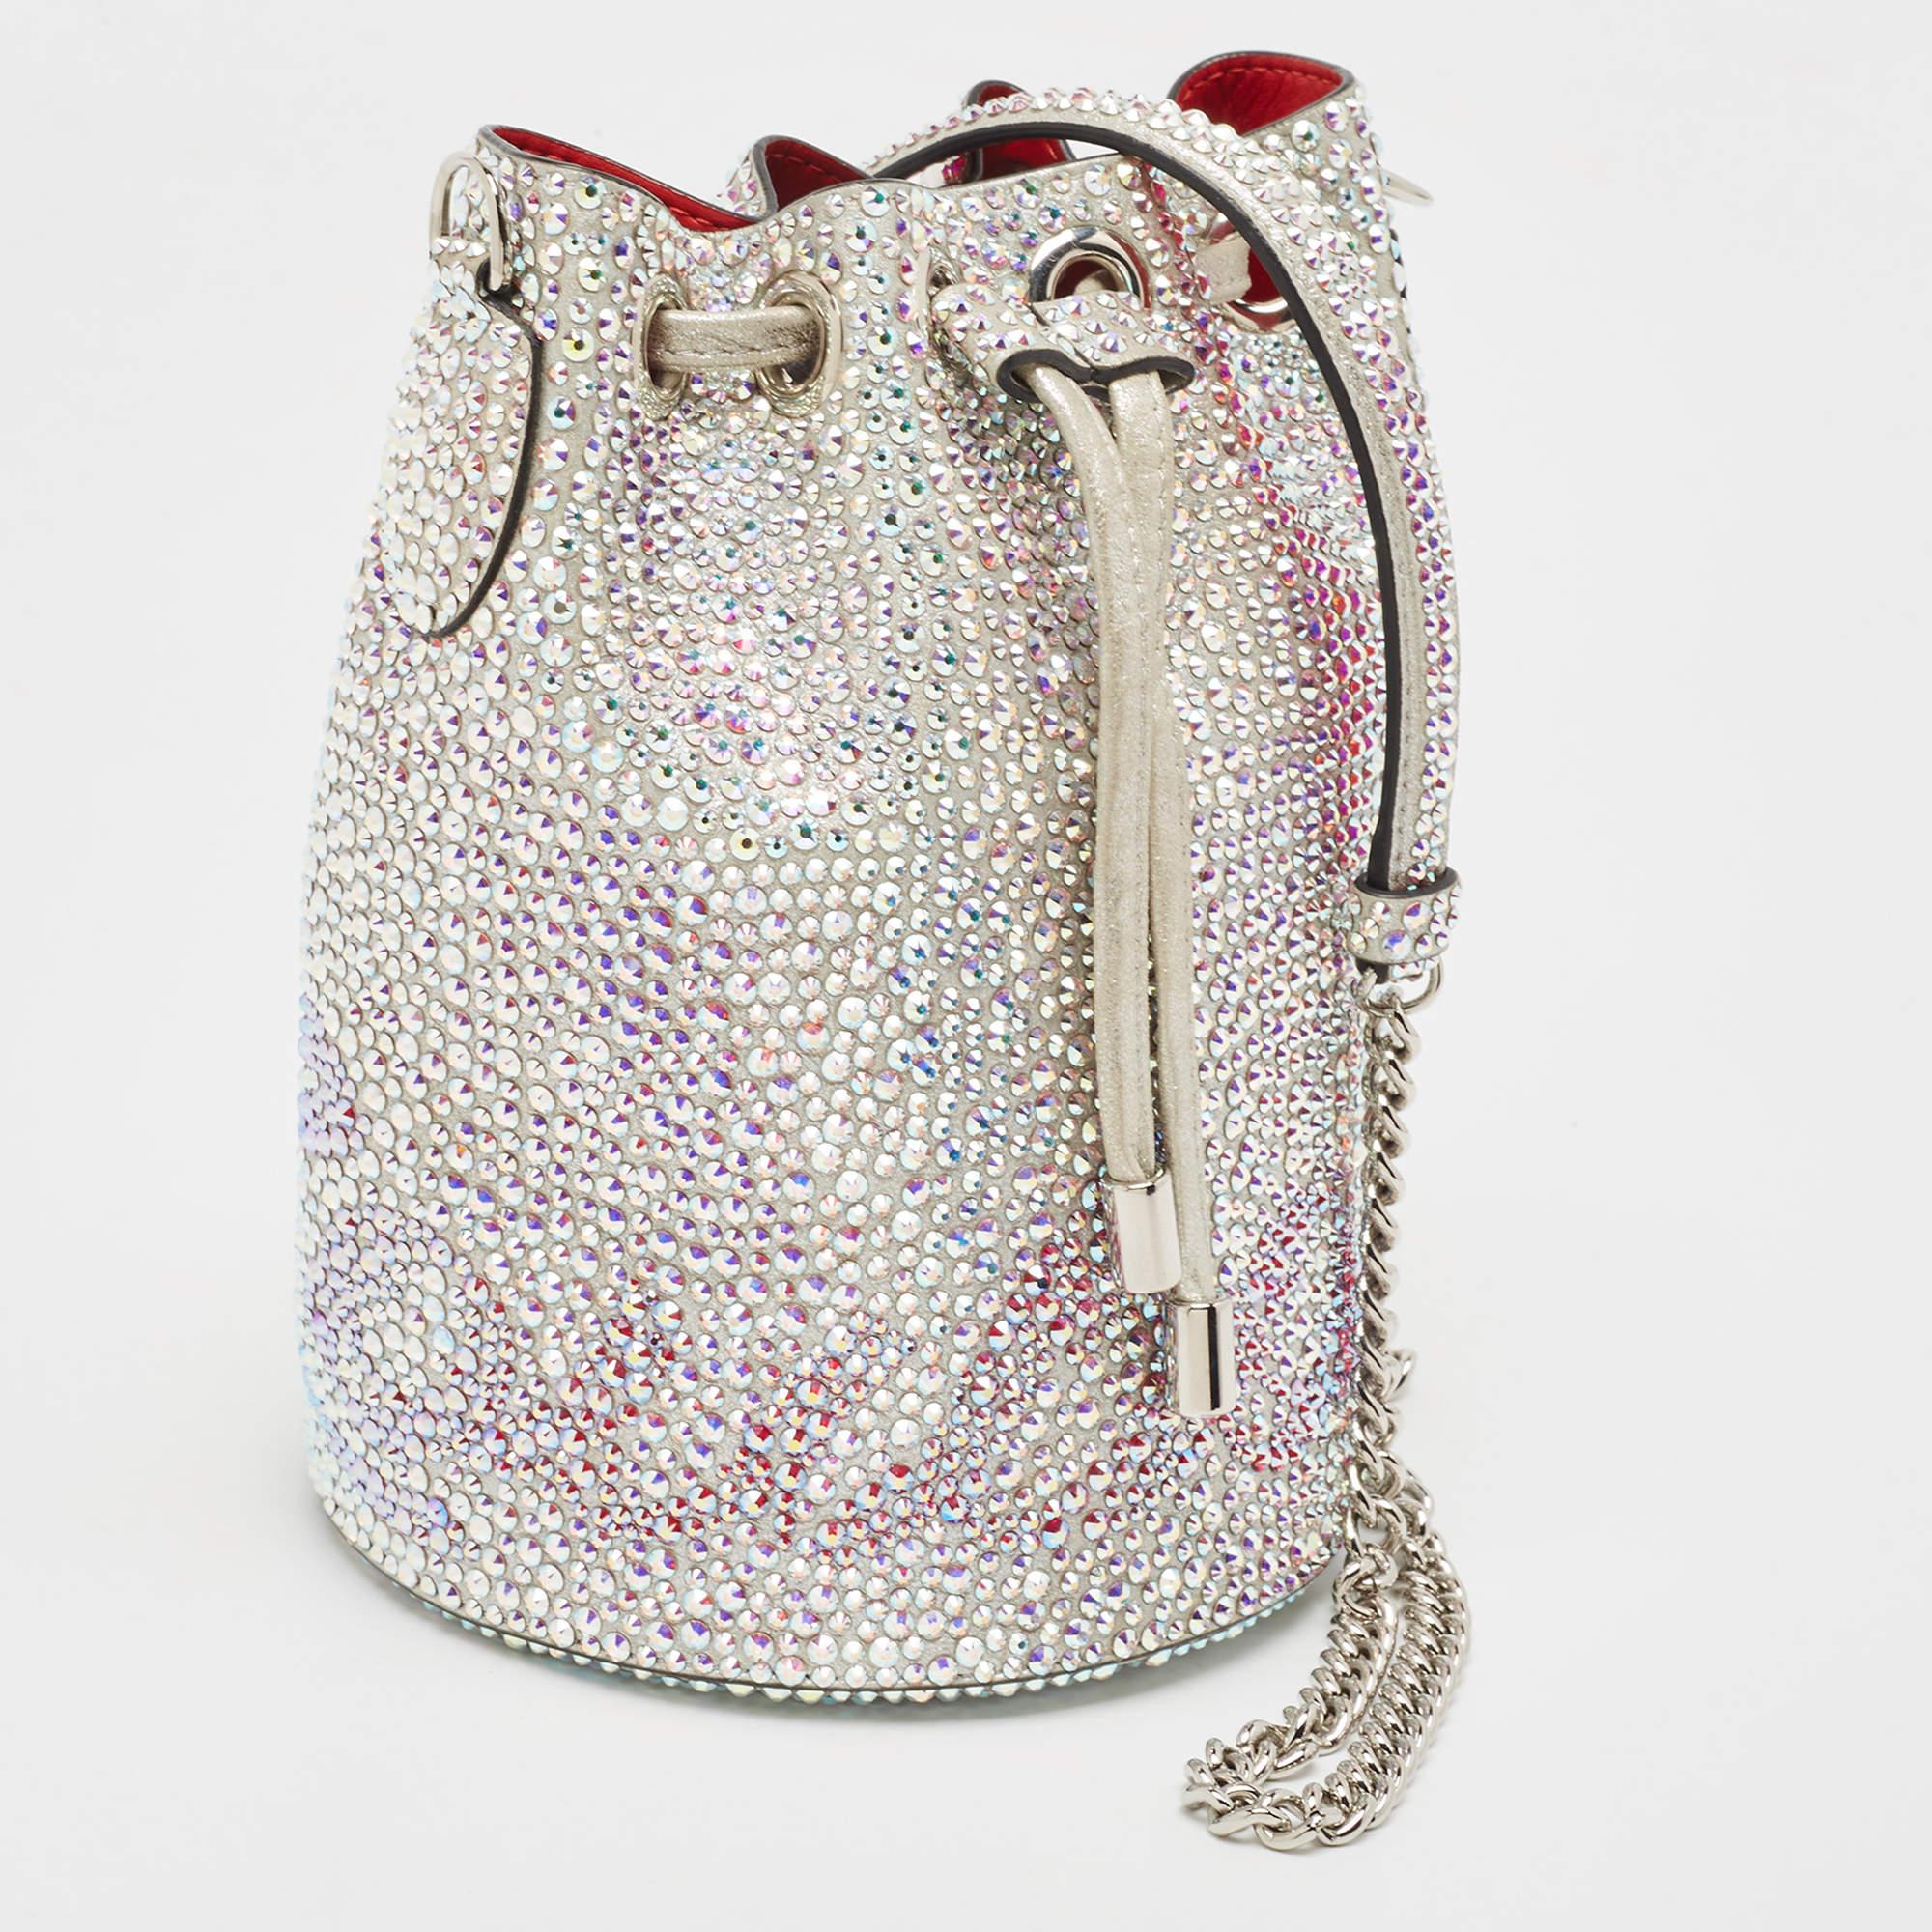 Christian Louboutin Silver Crystal Embellished Leather Marie Jane Bucket Bag In Good Condition For Sale In Dubai, Al Qouz 2